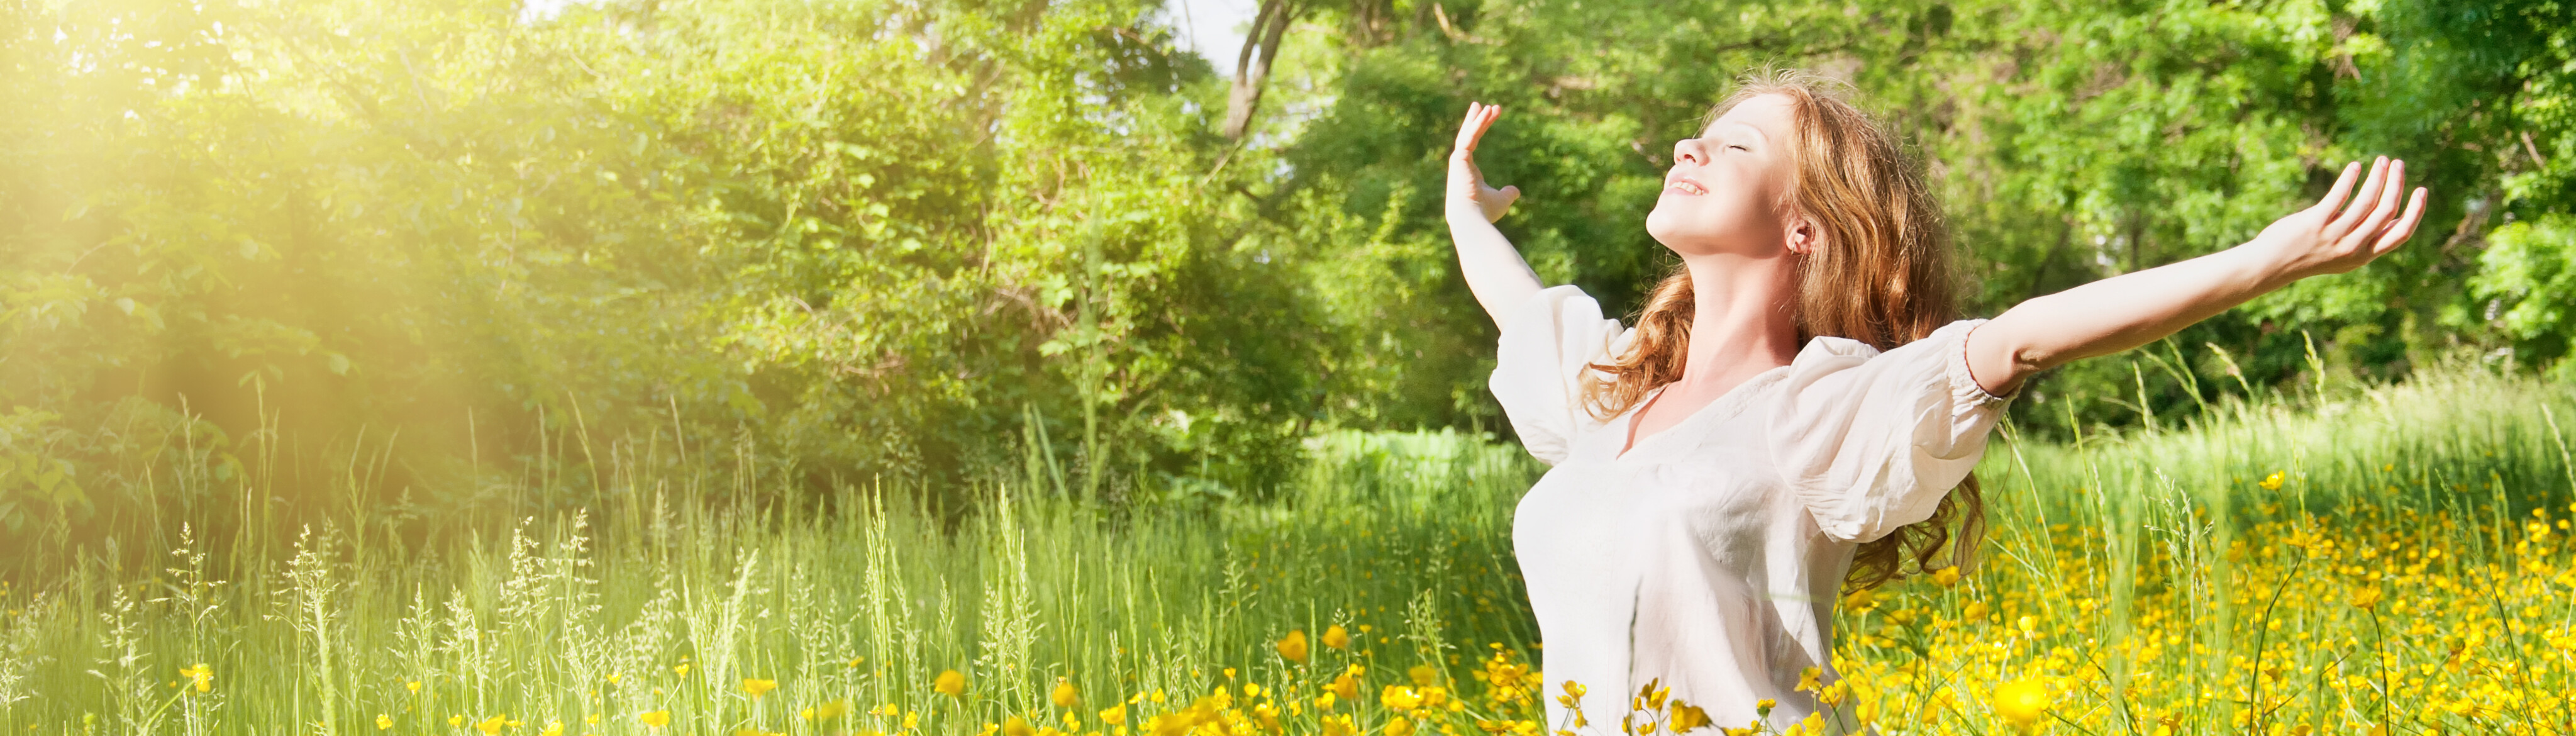 Woman standing in a field of flowers looking upward with outstretched arms